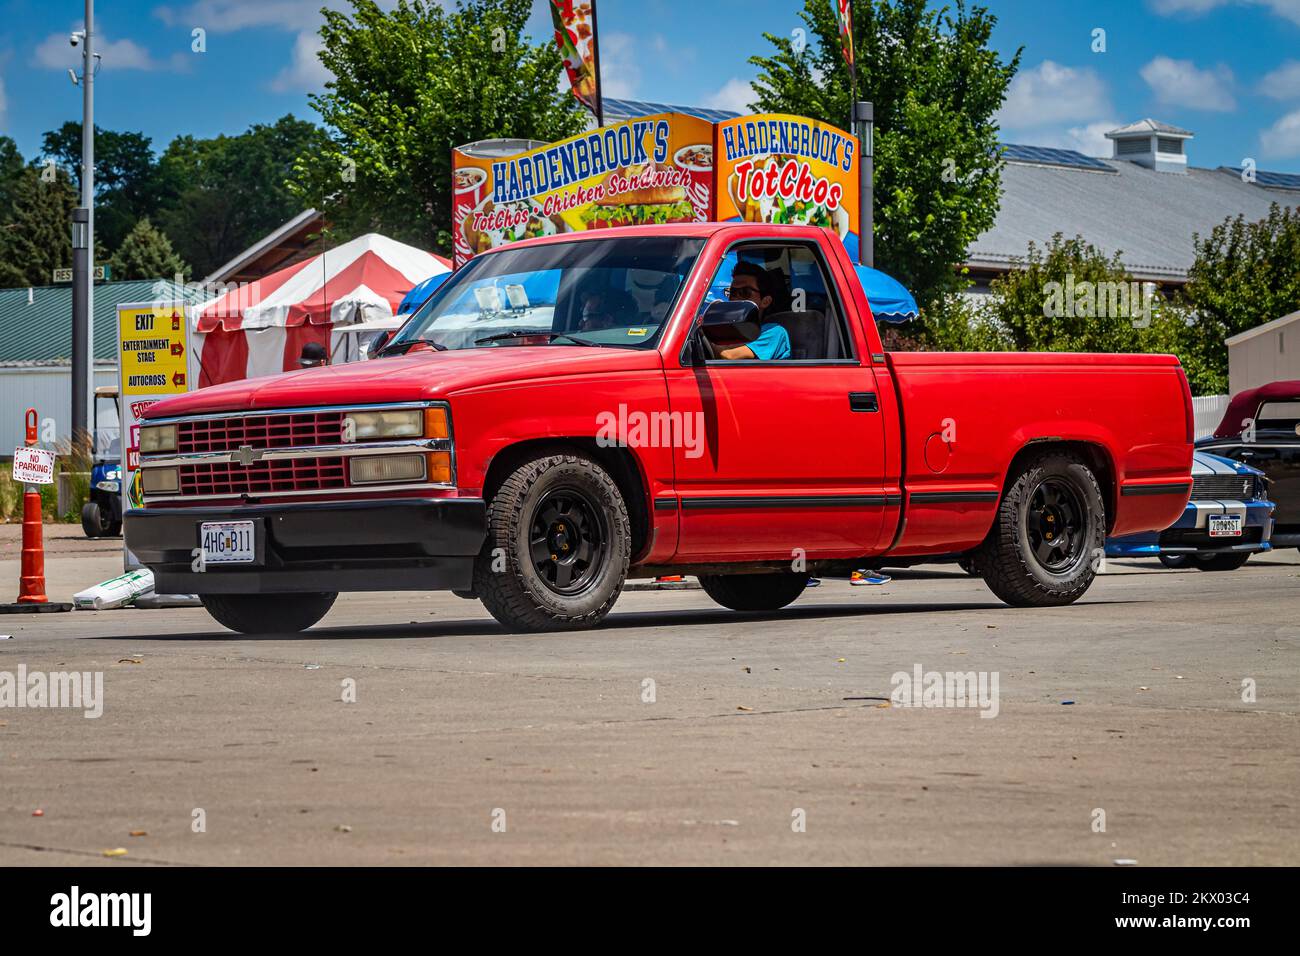 Des Moines, IA - July 03, 2022: Wide angle front corner view of a 1995 Chevrolet Silverado 1500 Pickup at a local car show. Stock Photo